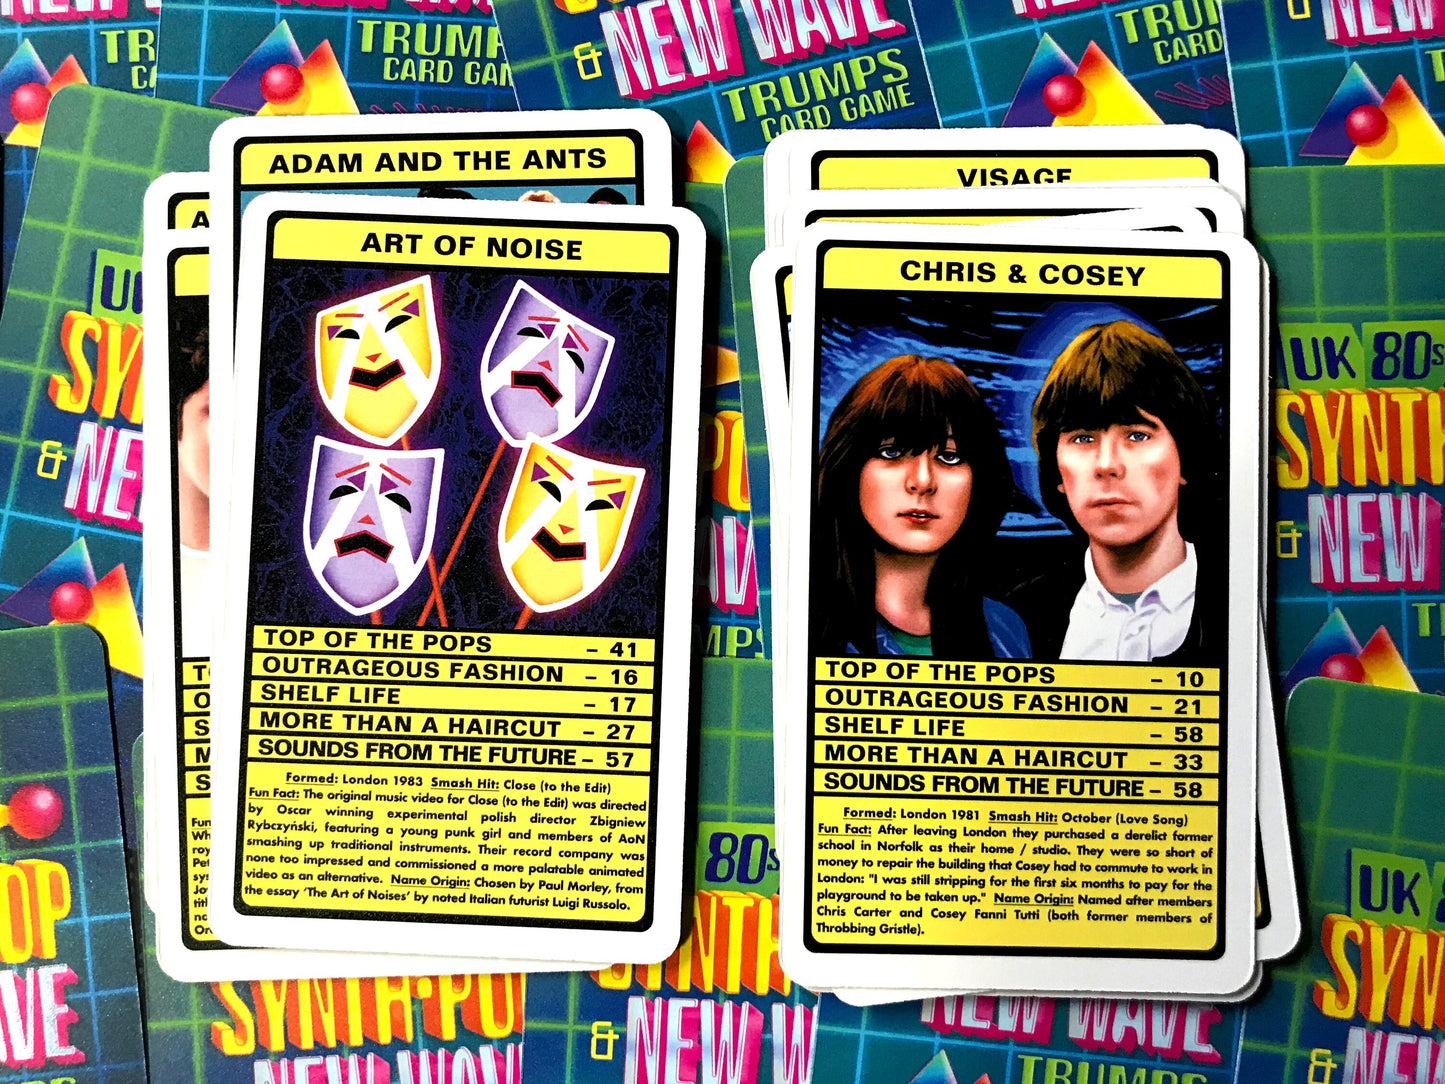 UK 80s SYNTH-POP & NEW WAVE  TRUMPS